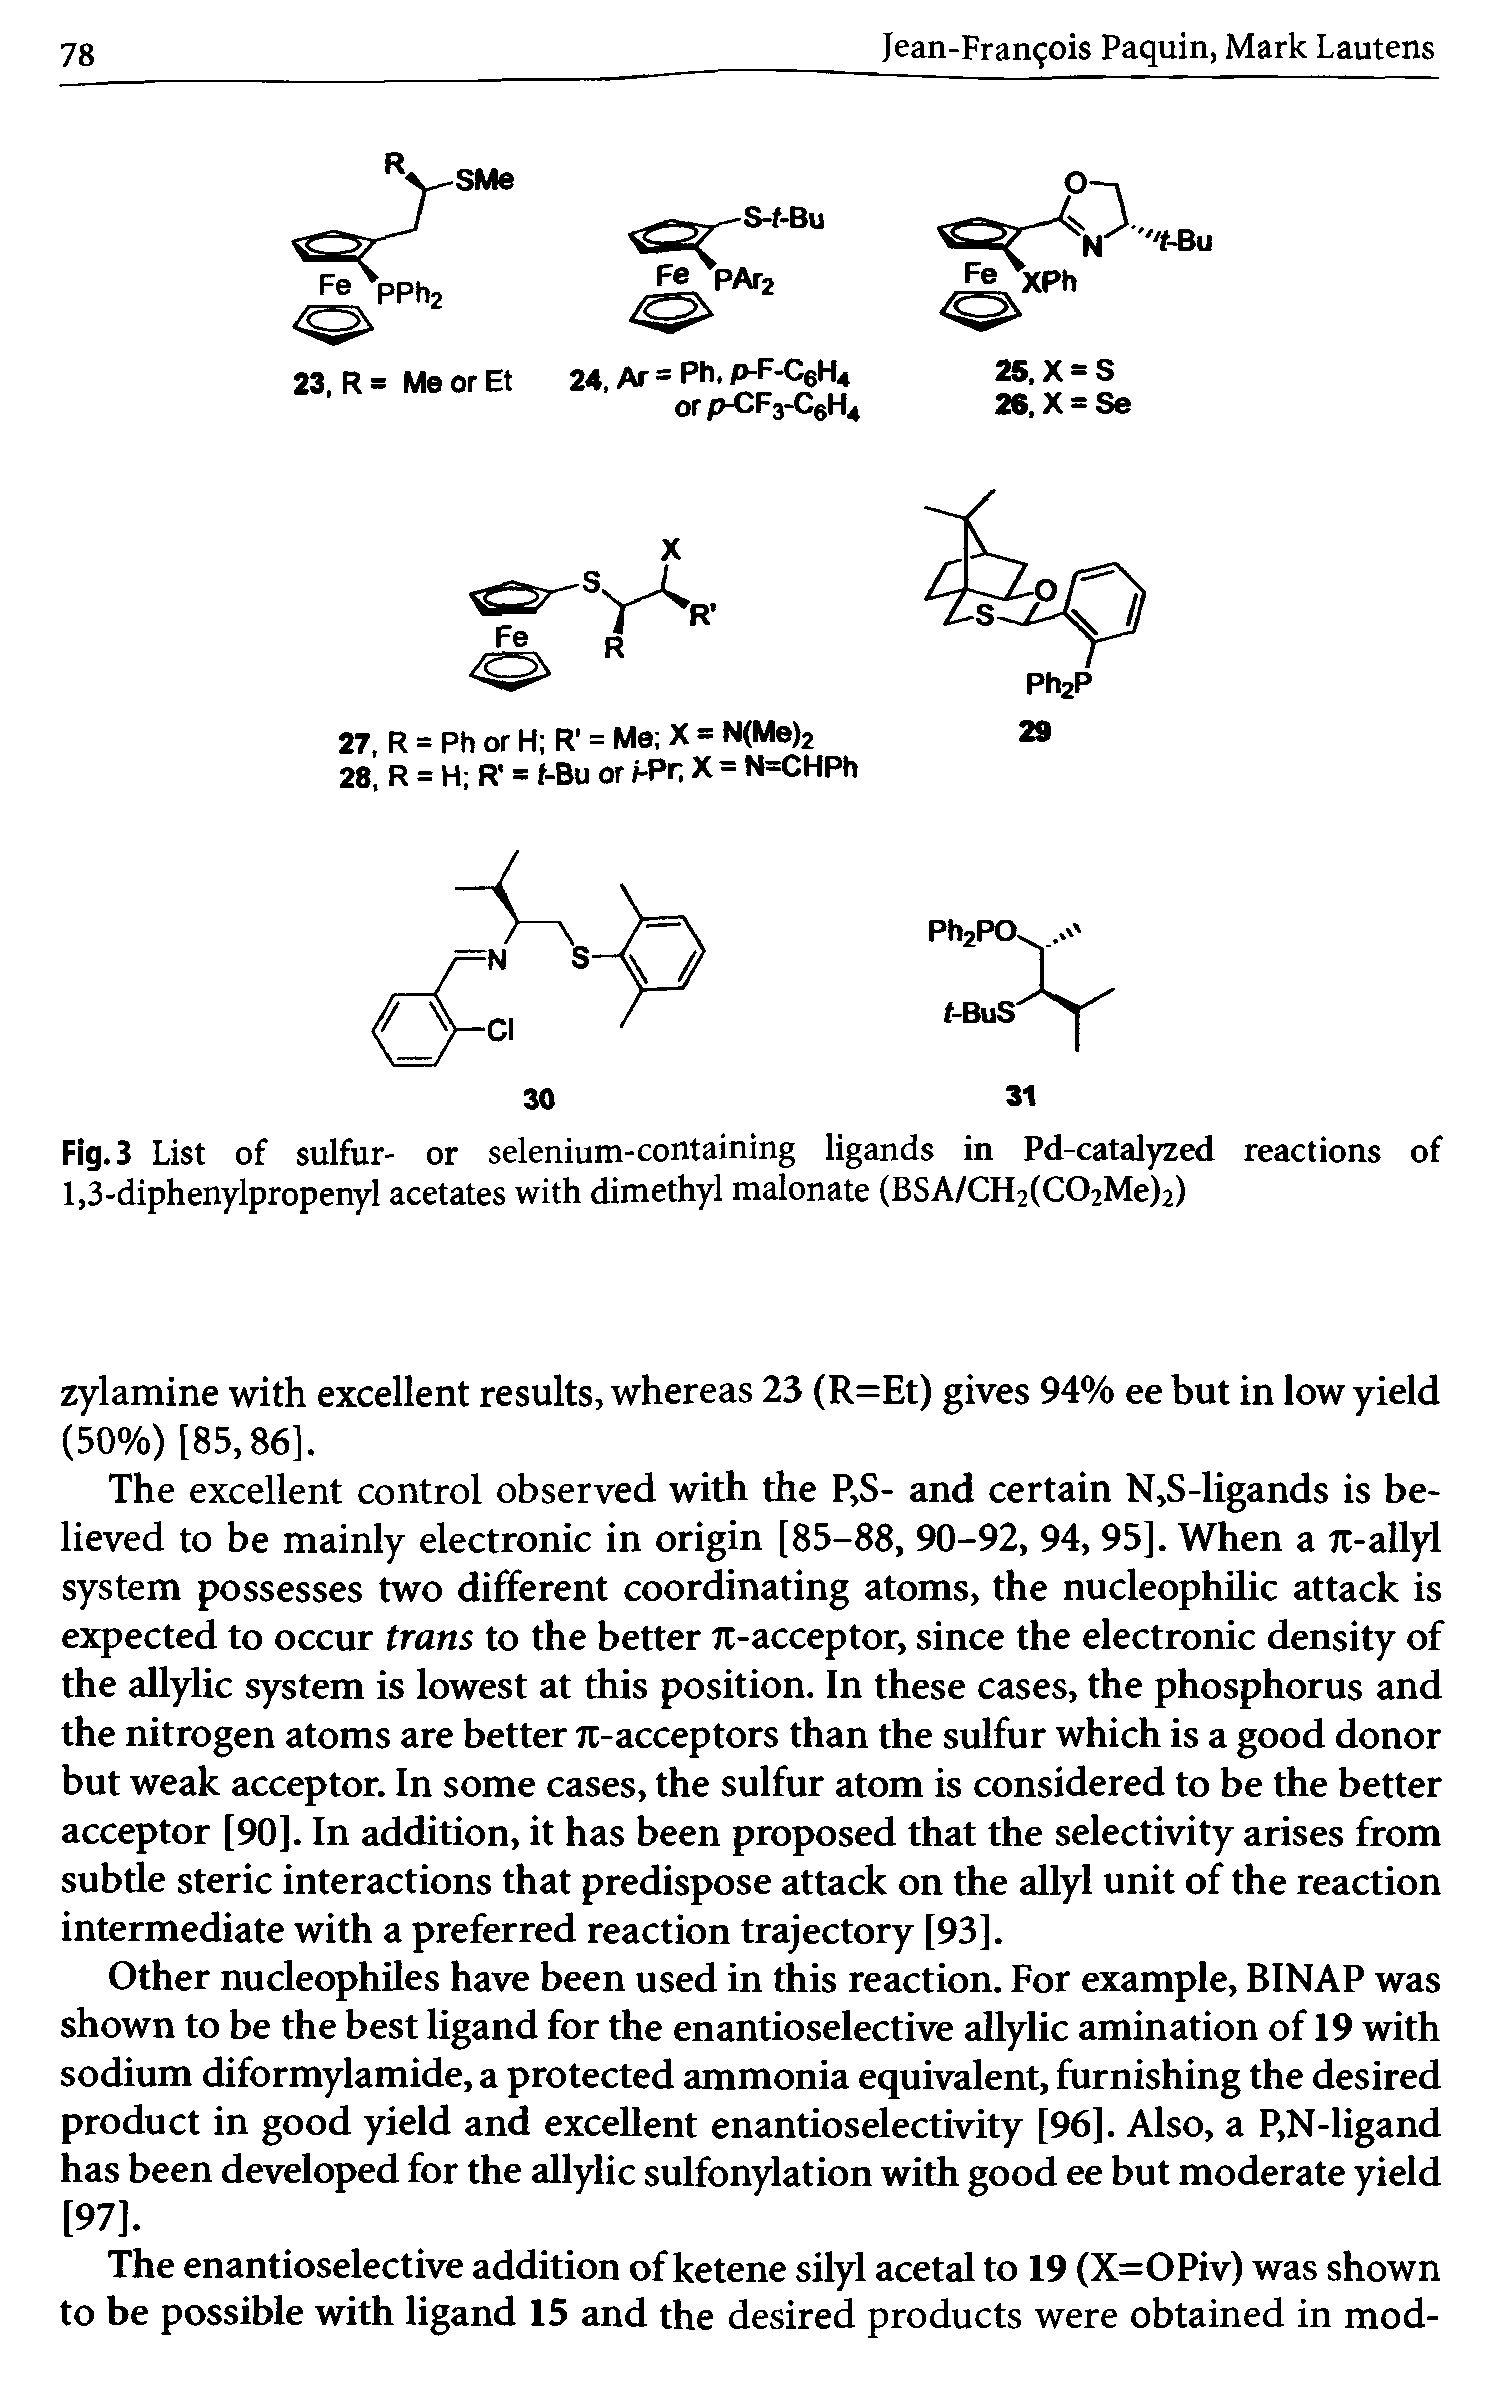 Fig. 3 List of sulfur- or selenium-containing ligands in Pd-catalyzed reactions of 1,3-diphenylpropenyl acetates with dimethyl malonate (BSA/CH2(C02Me)2)...